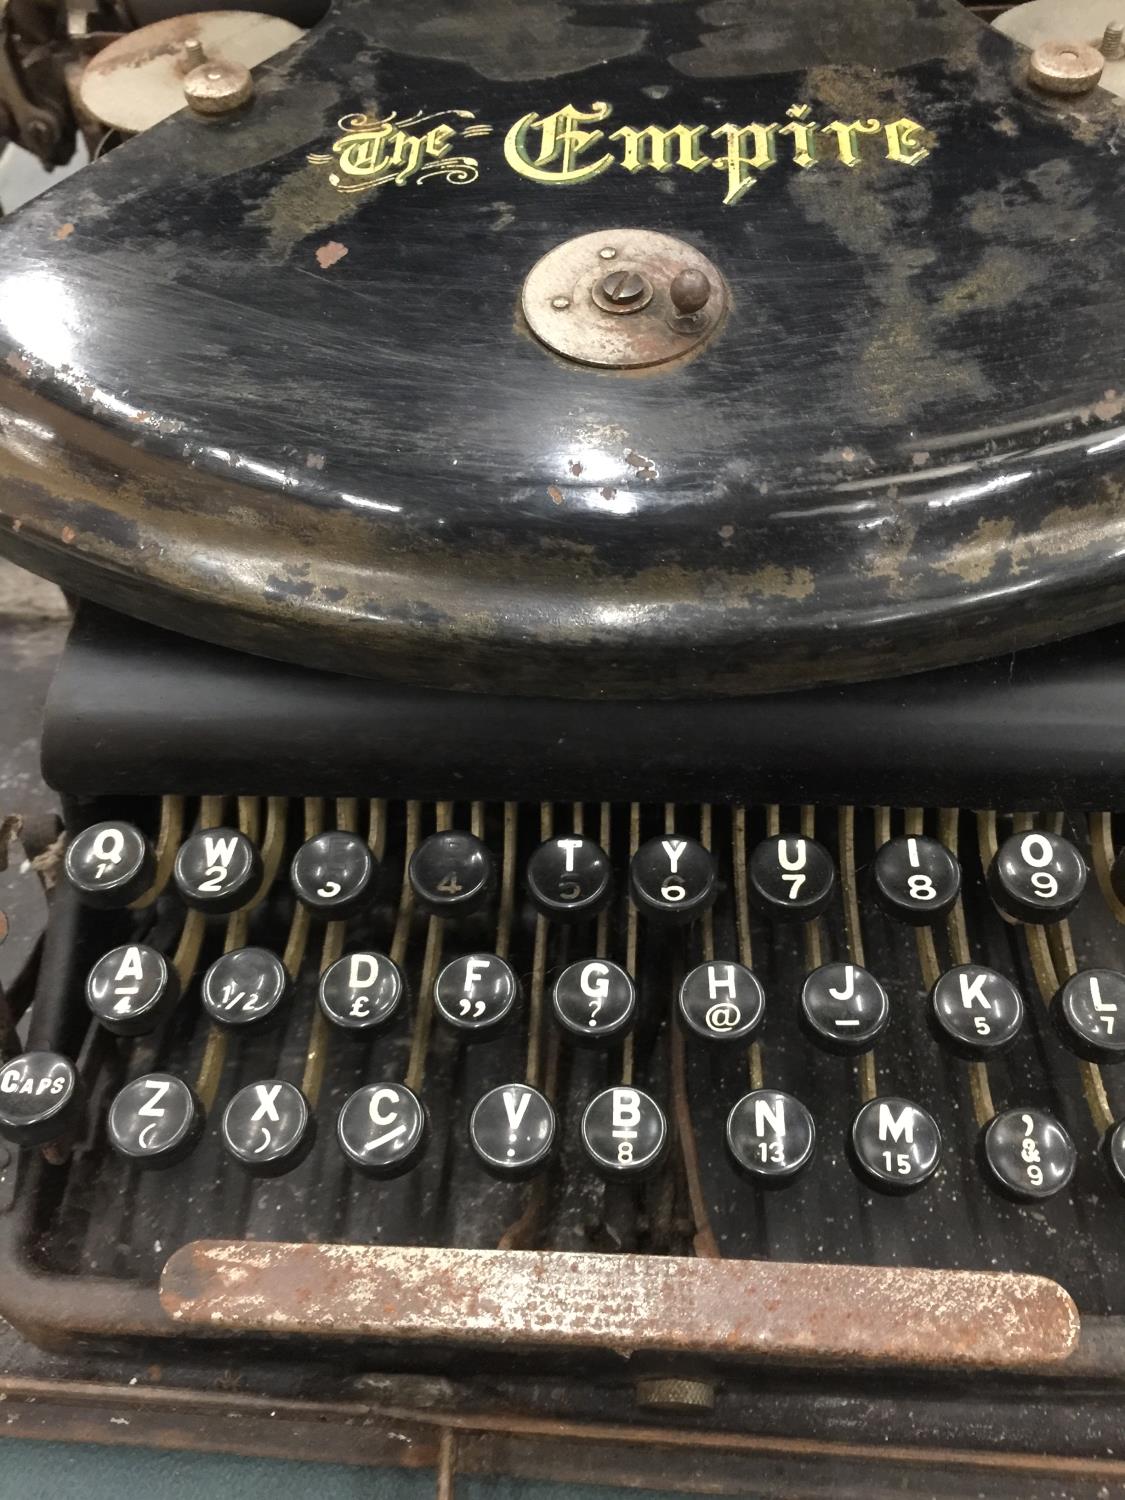 A VINTAGE 'THE EMPIRE' TYPEWRITER IN METAL CASE - Image 3 of 3